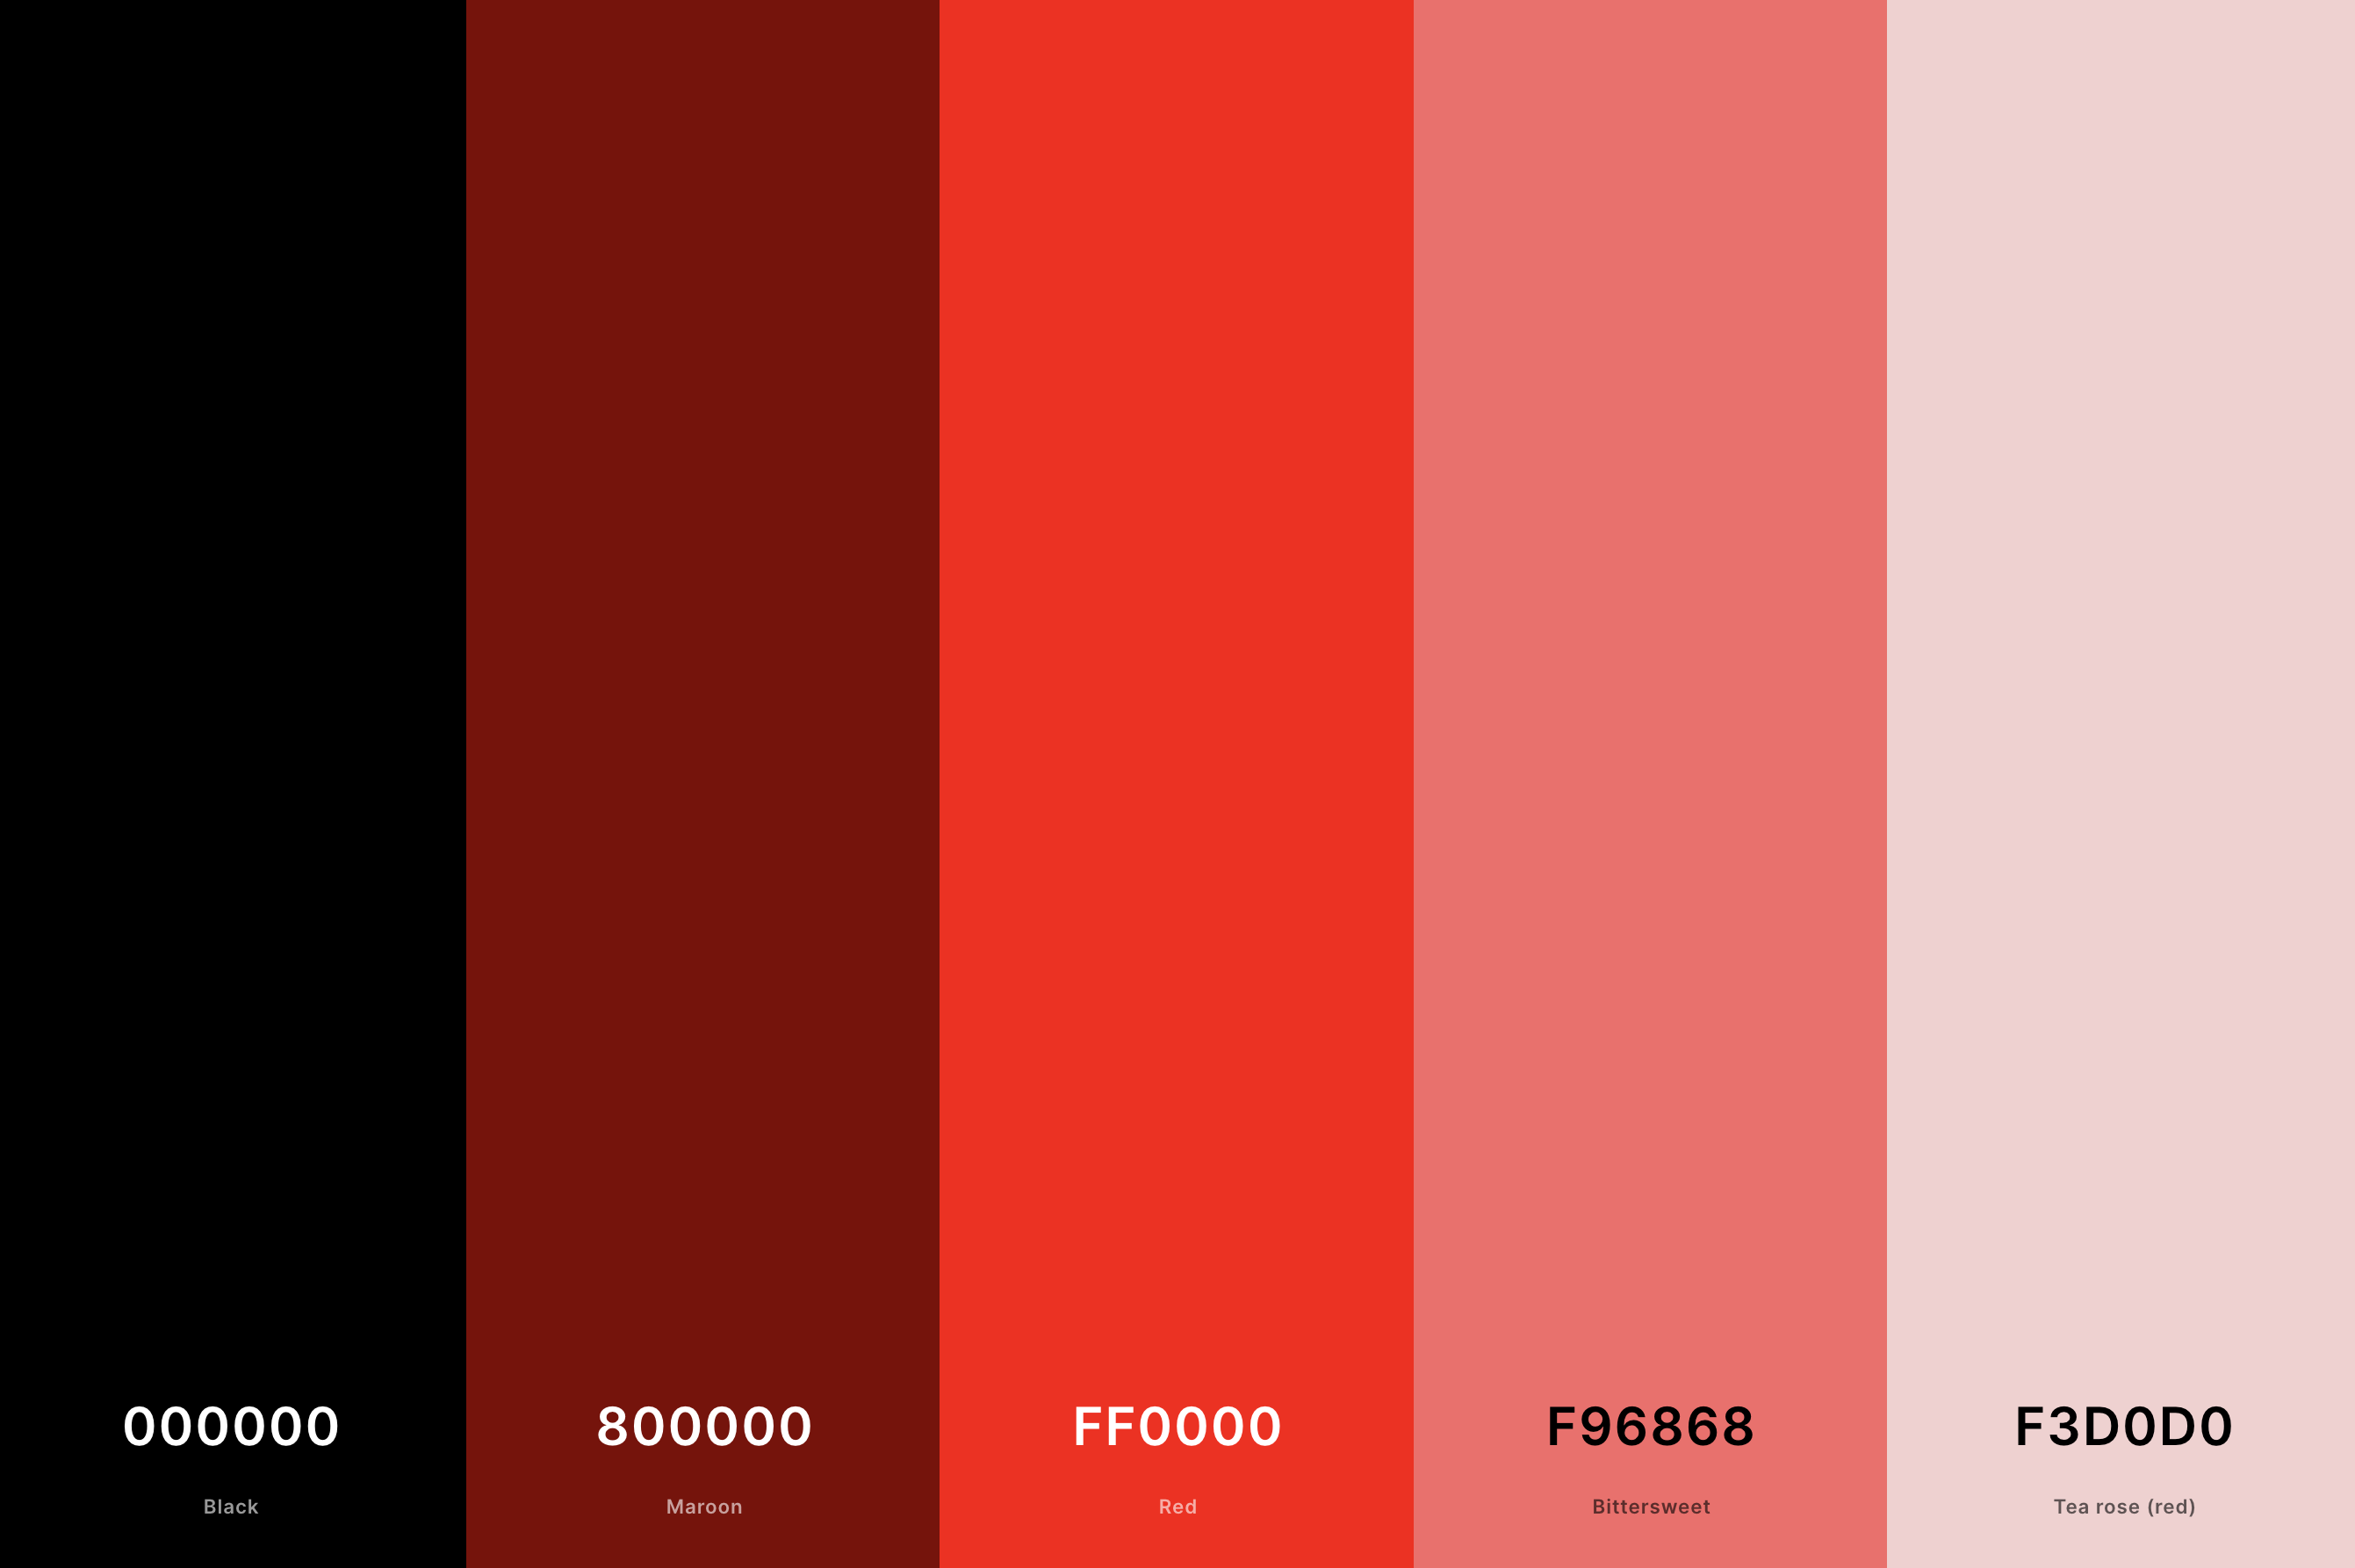 16. Aesthetic Red Color Palette Color Palette with Black (Hex #000000) + Maroon (Hex #800000) + Red (Hex #FF0000) + Bittersweet (Hex #F96868) + Tea Rose (Red) (Hex #F3D0D0) Color Palette with Hex Codes